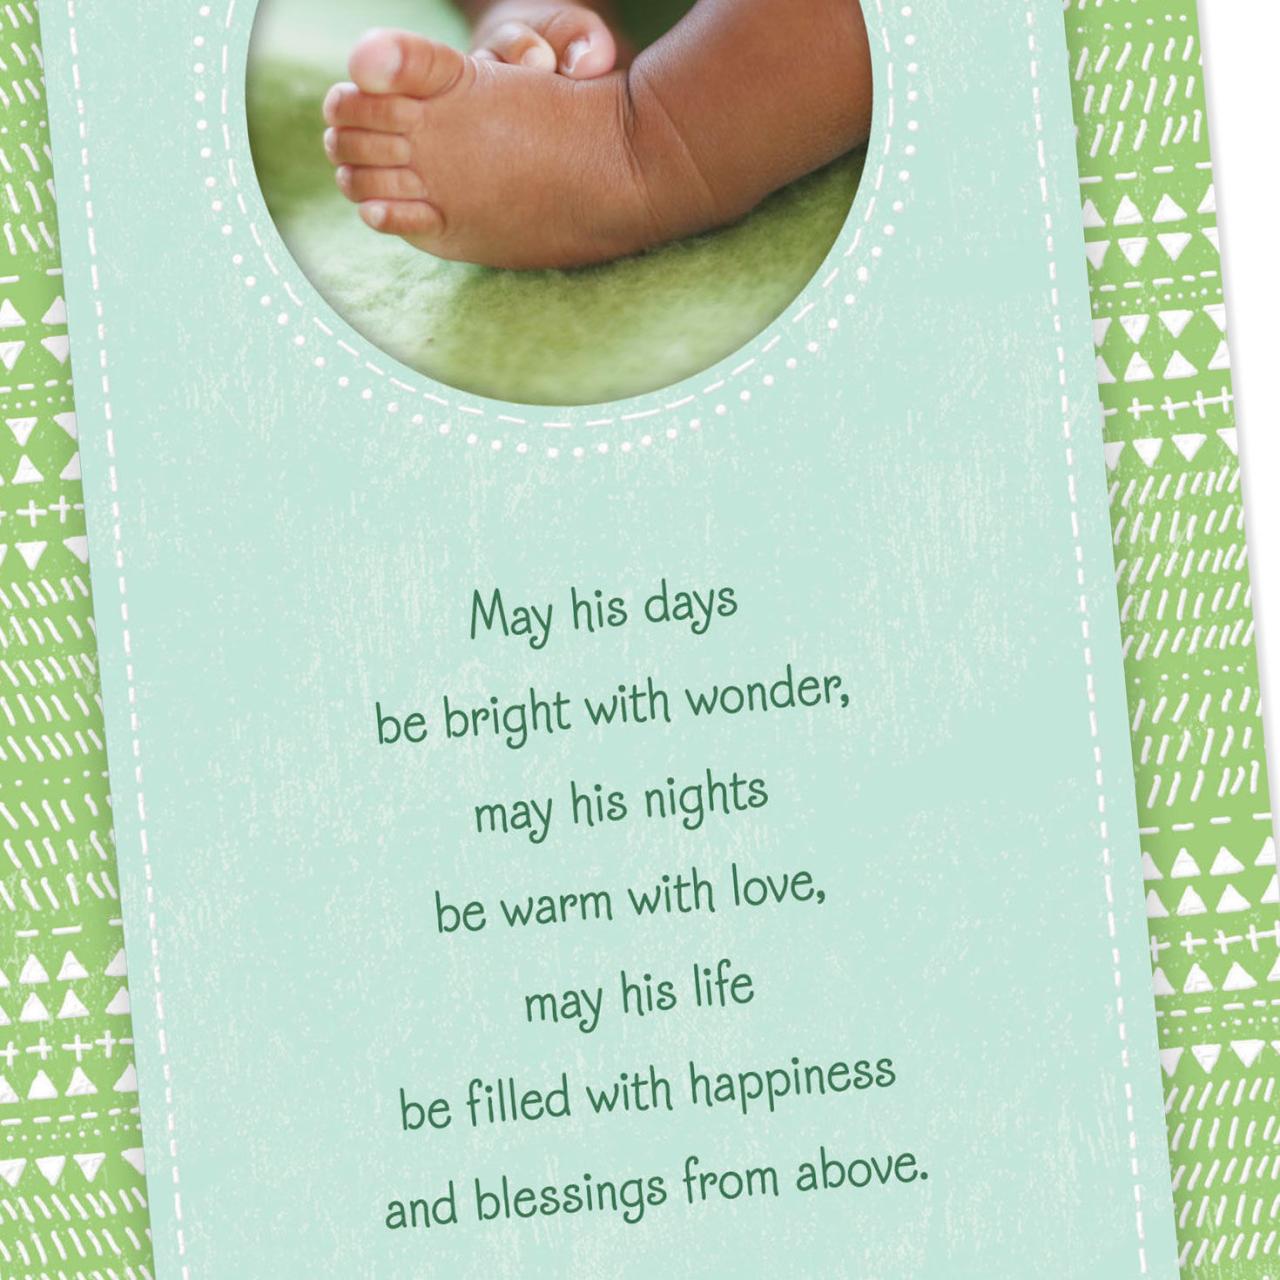 Religious Baby Shower Card Messages: Celebrating New Life with Faith ...